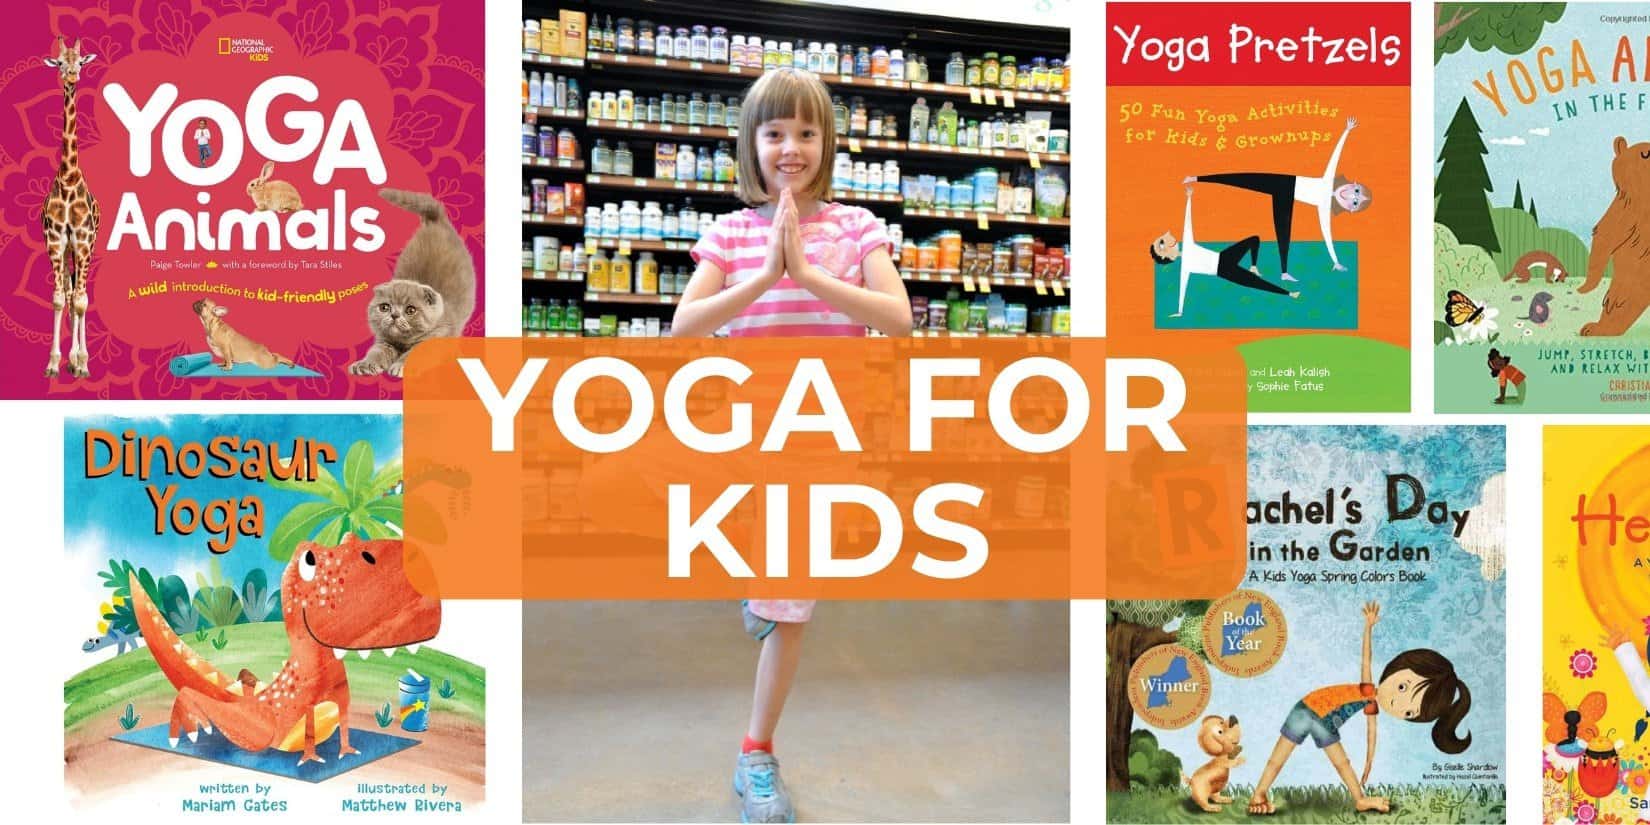 Helpful Yoga for Kids Resources: Books, Videos, & Games